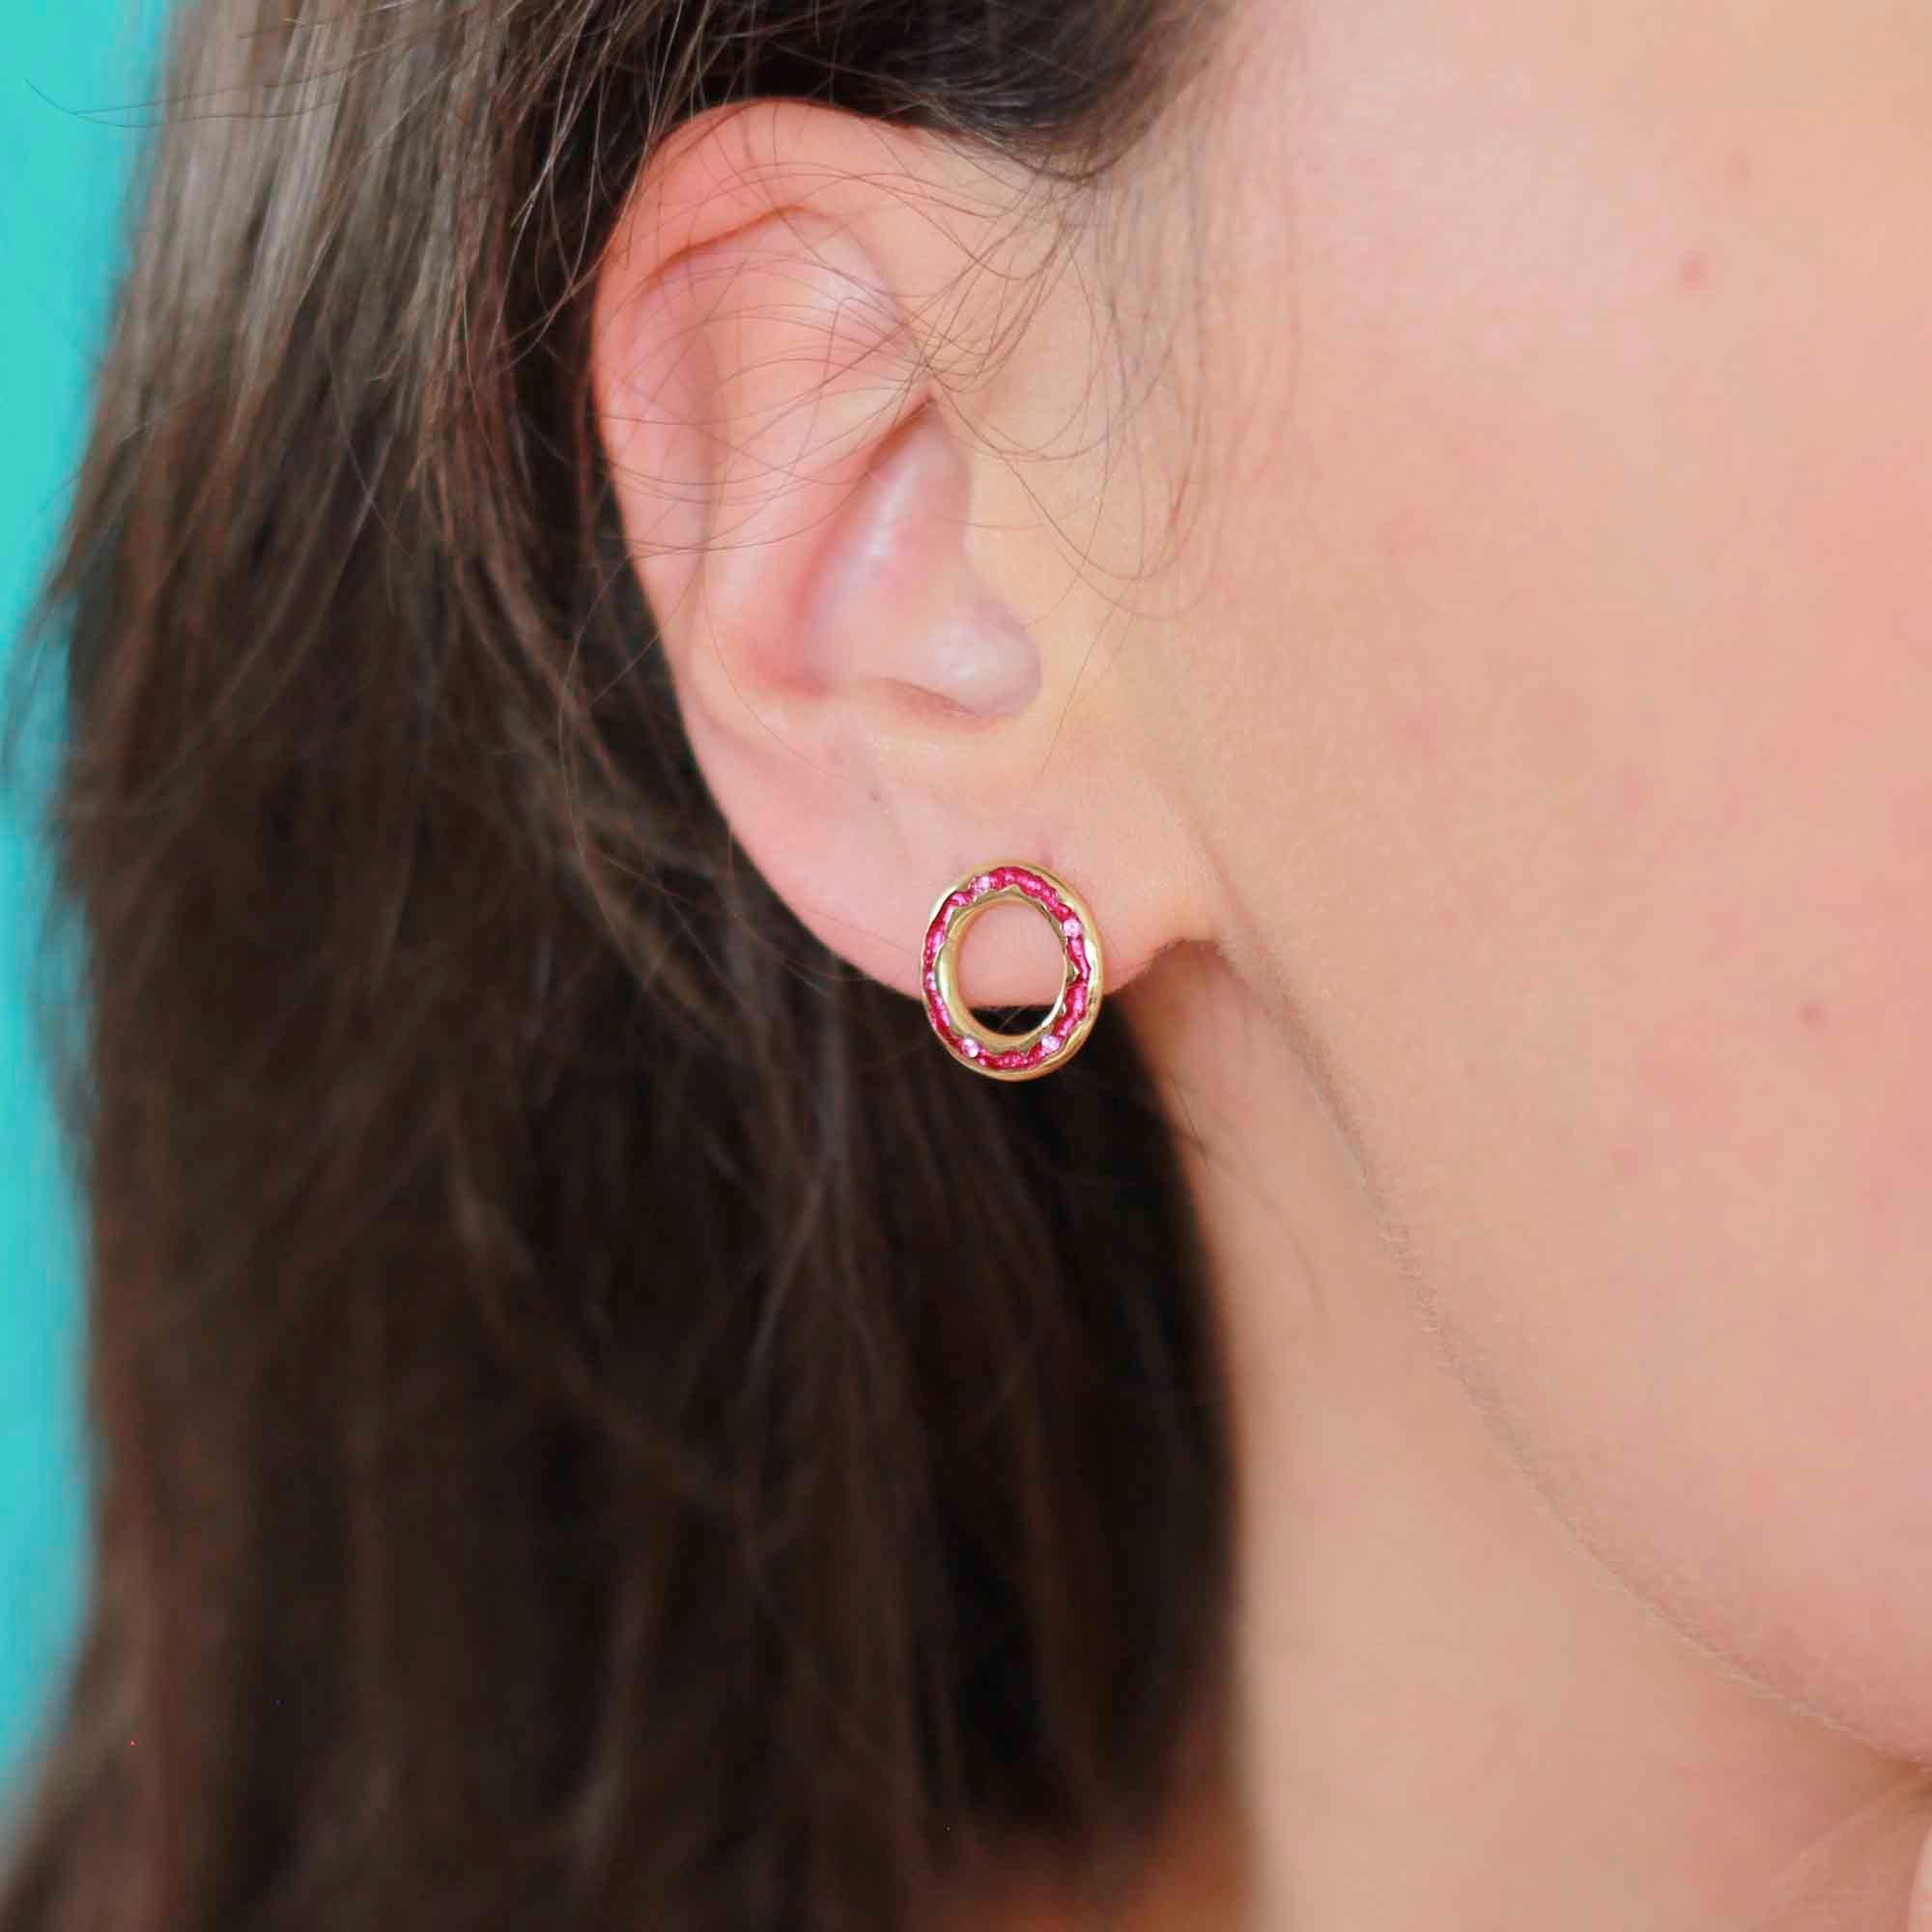 Transport yourself back to the carefree days of childhood beach adventures with these captivating fuchsia pink sapphire stud earrings. With their vivid hues reminiscent of the vibrant rock pools, these circle studs inject a playful pop of color that